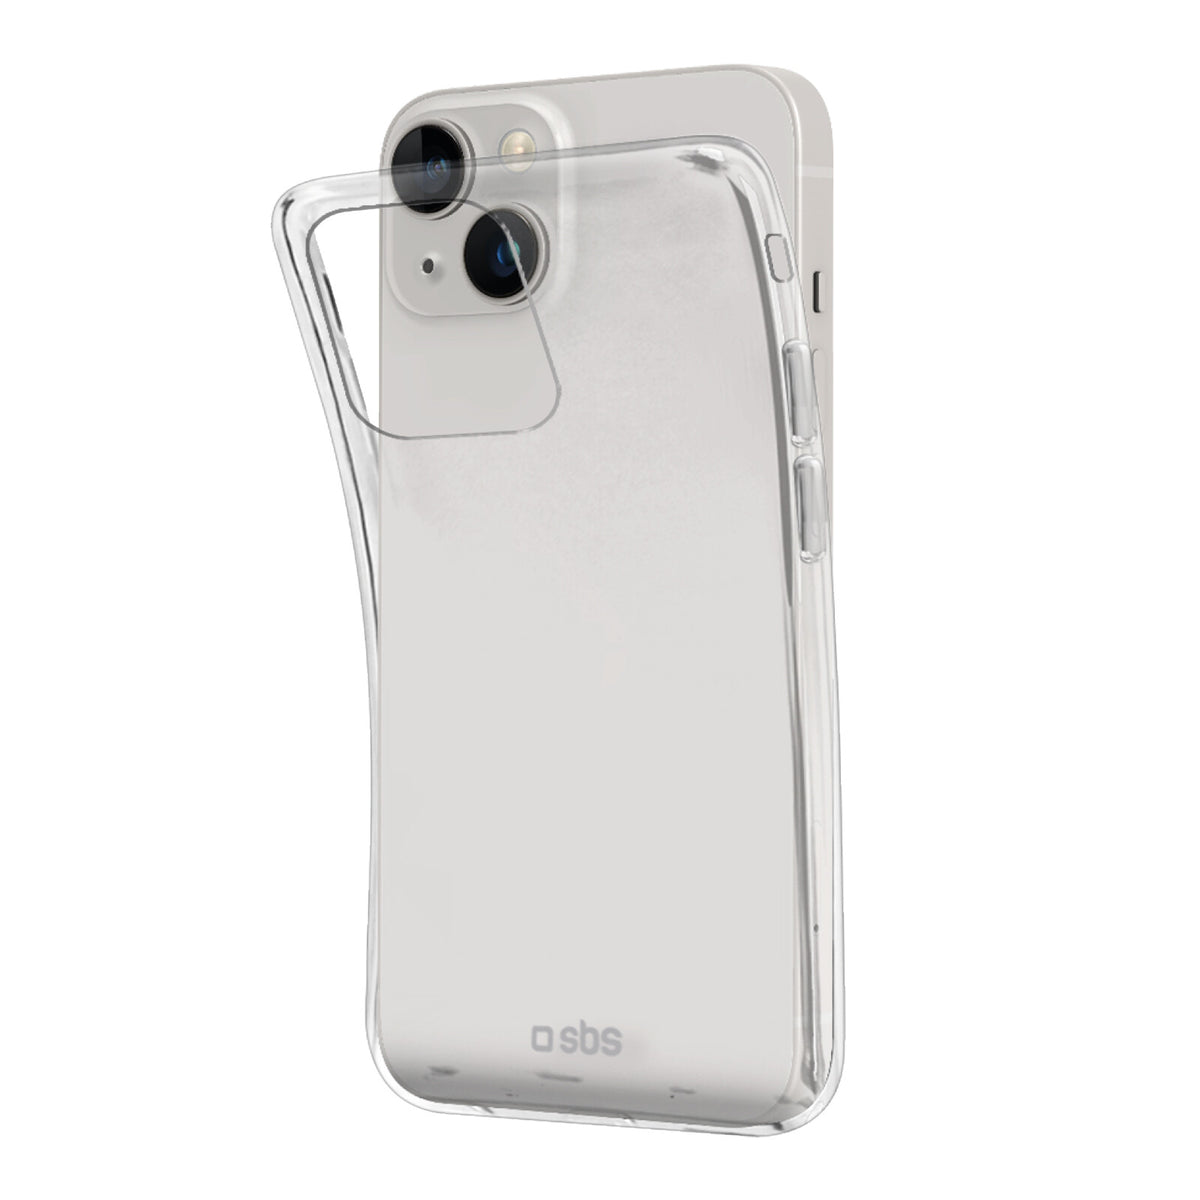 SBS Skinny mobile phone case for iPhone 15 in Transparent